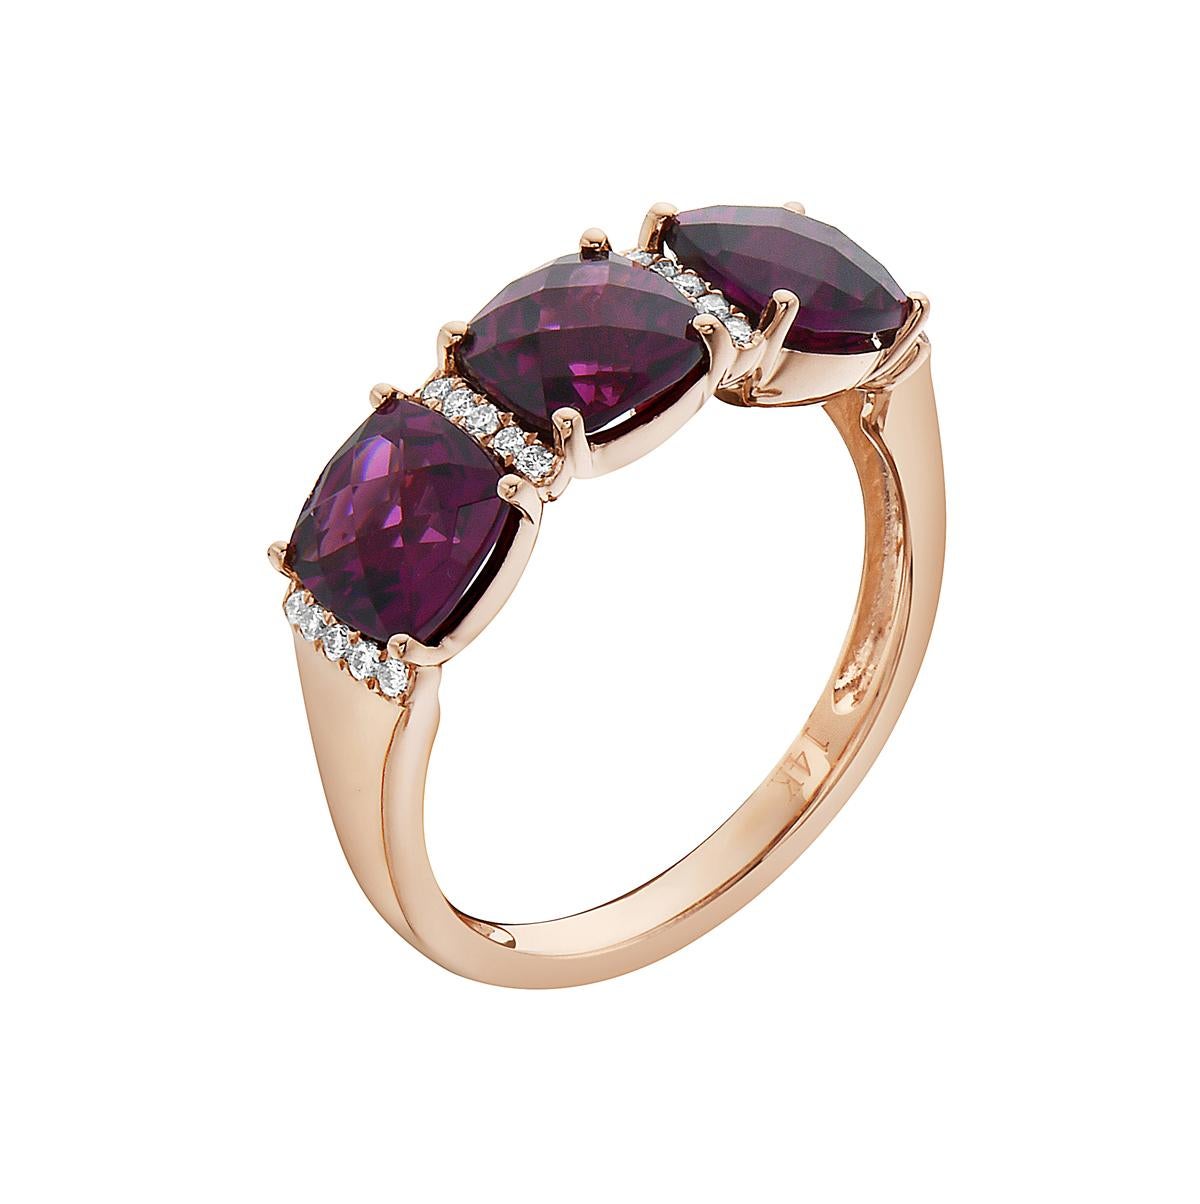 With this exquisite semi-precious rhodolite ring, style and glamour are in the spotlight. This 14-karat cushion cut ring is made from 3.4 grams of gold, 3 rhodolites totaling 3.94 karats, and is surrounded by 20 round SI1-SI2, GH color diamonds